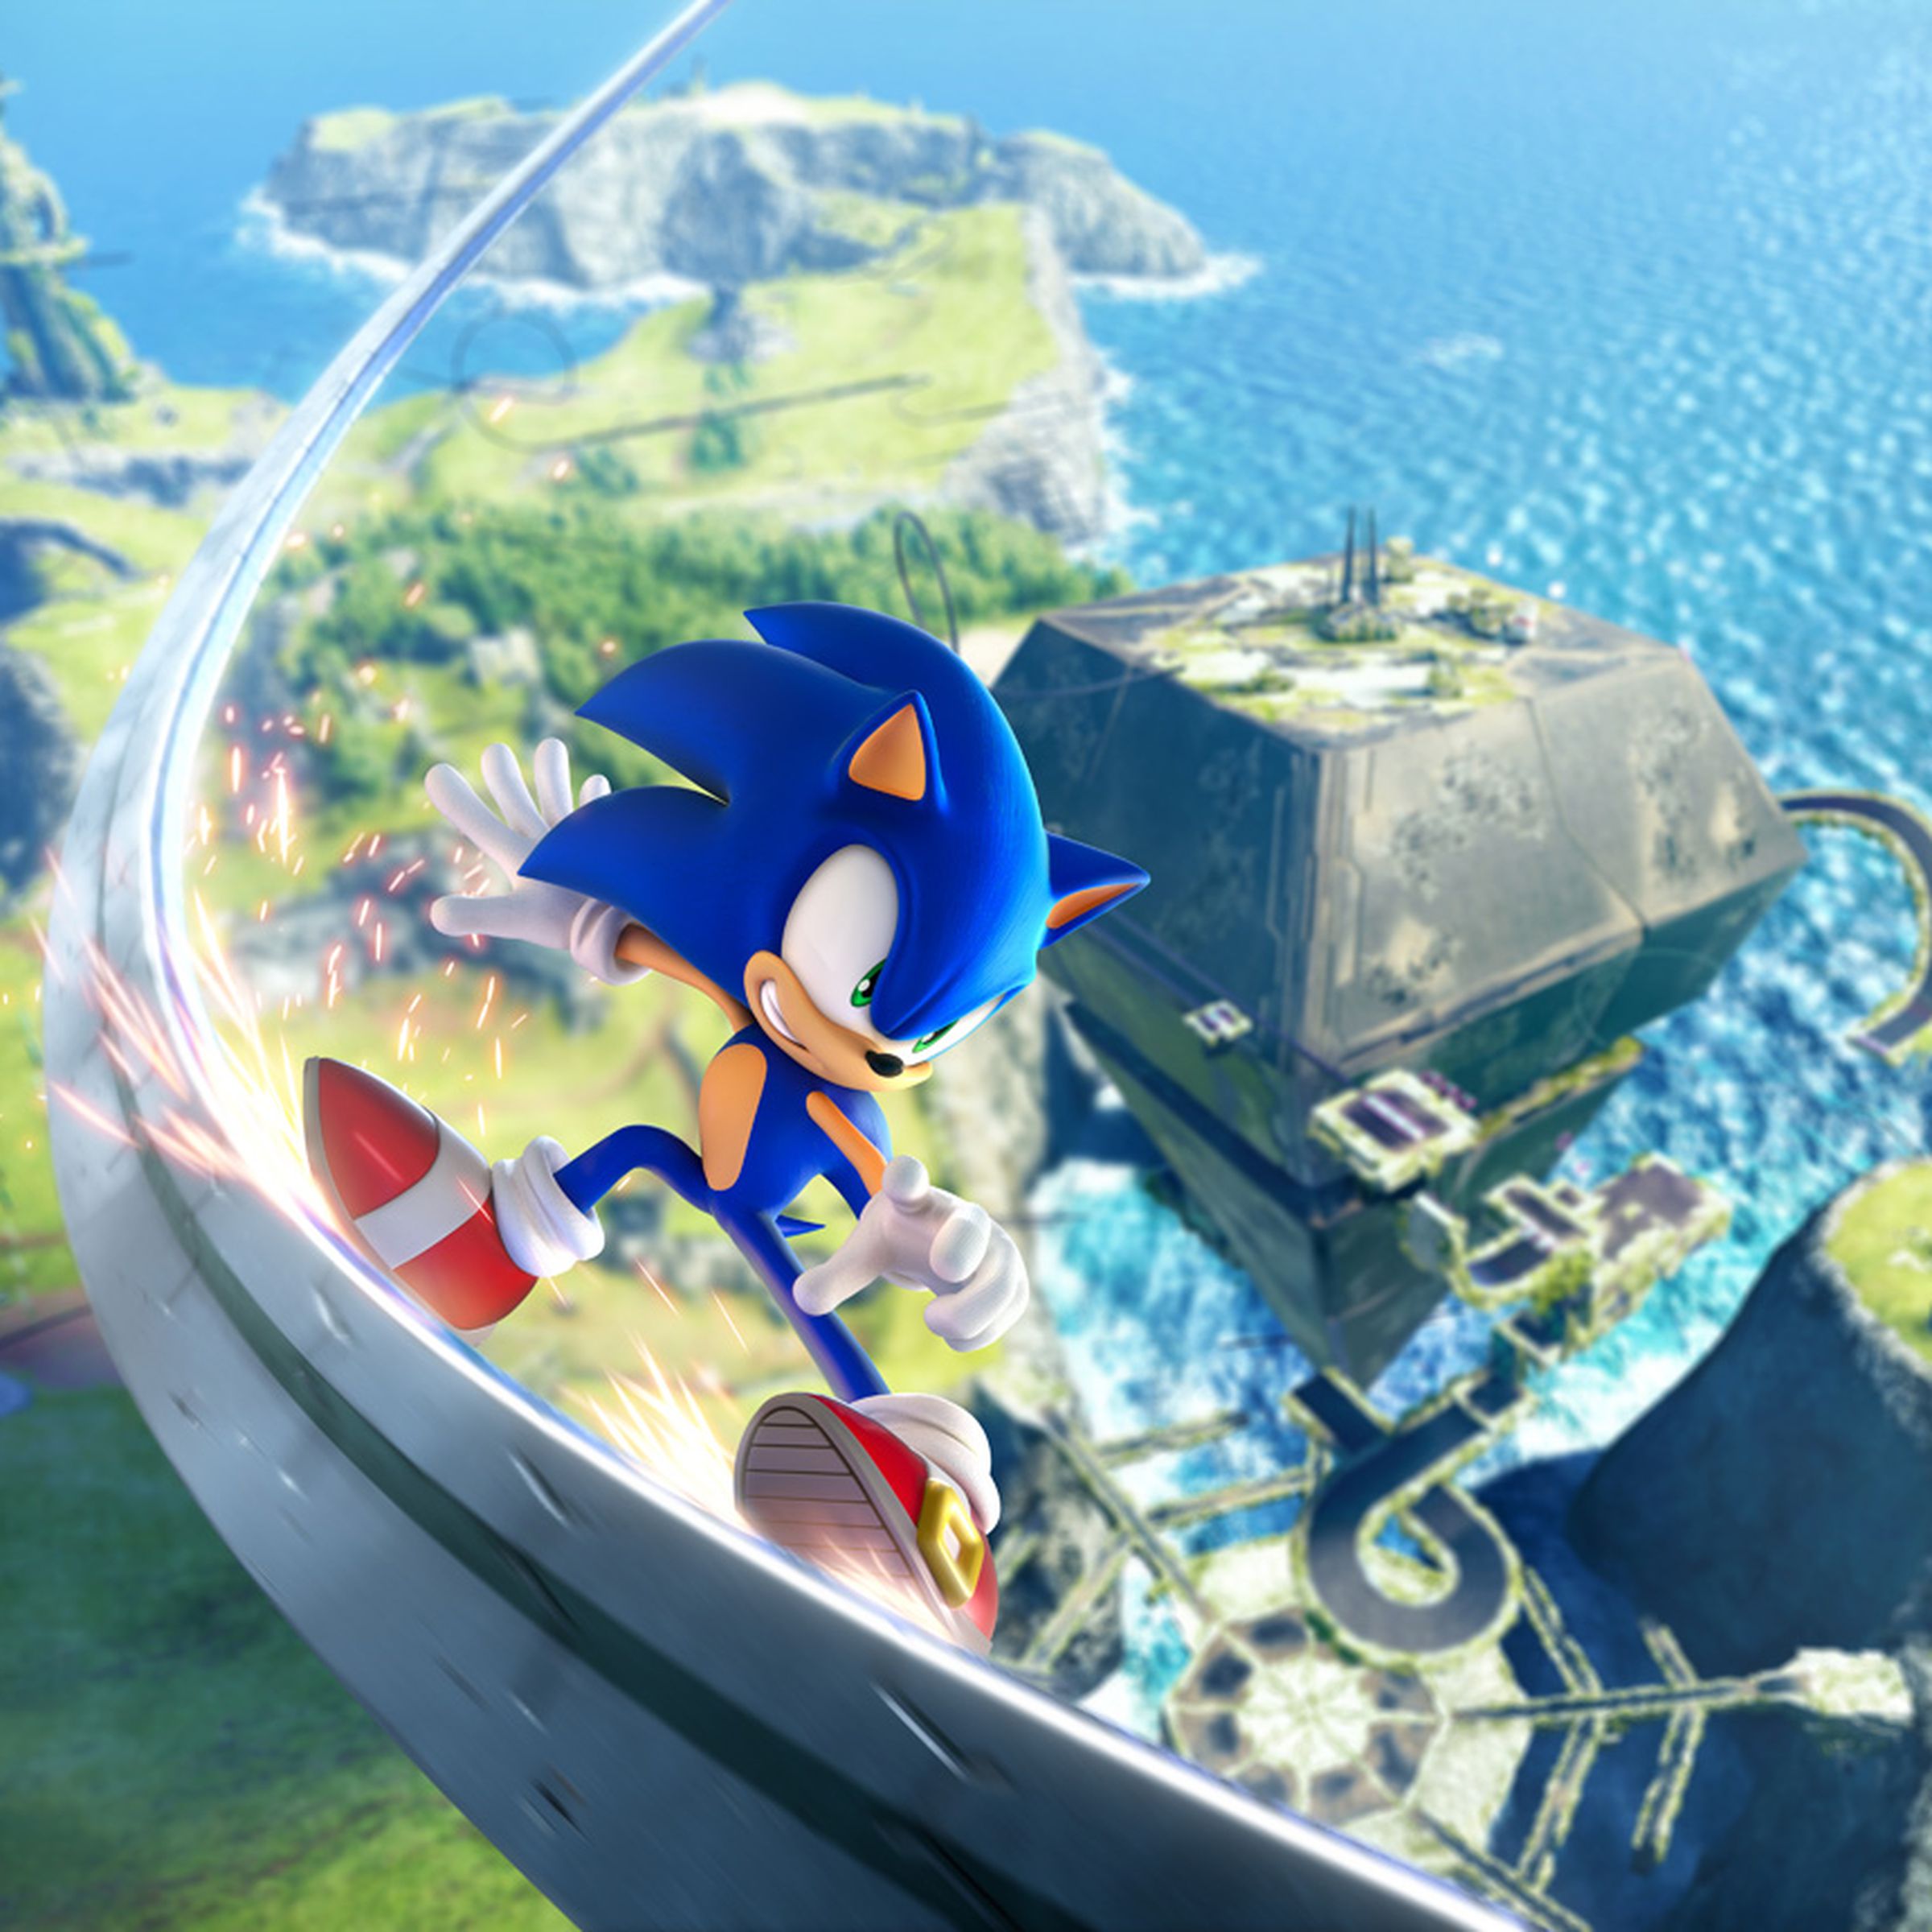 Splash screen for Sonic Frontiers featuring Sonic the Hedgehog grinding on a rail with the words Sonic Frontiers in the upper right hand corner against a blurred background of brightly light ruins and a lush green landscape